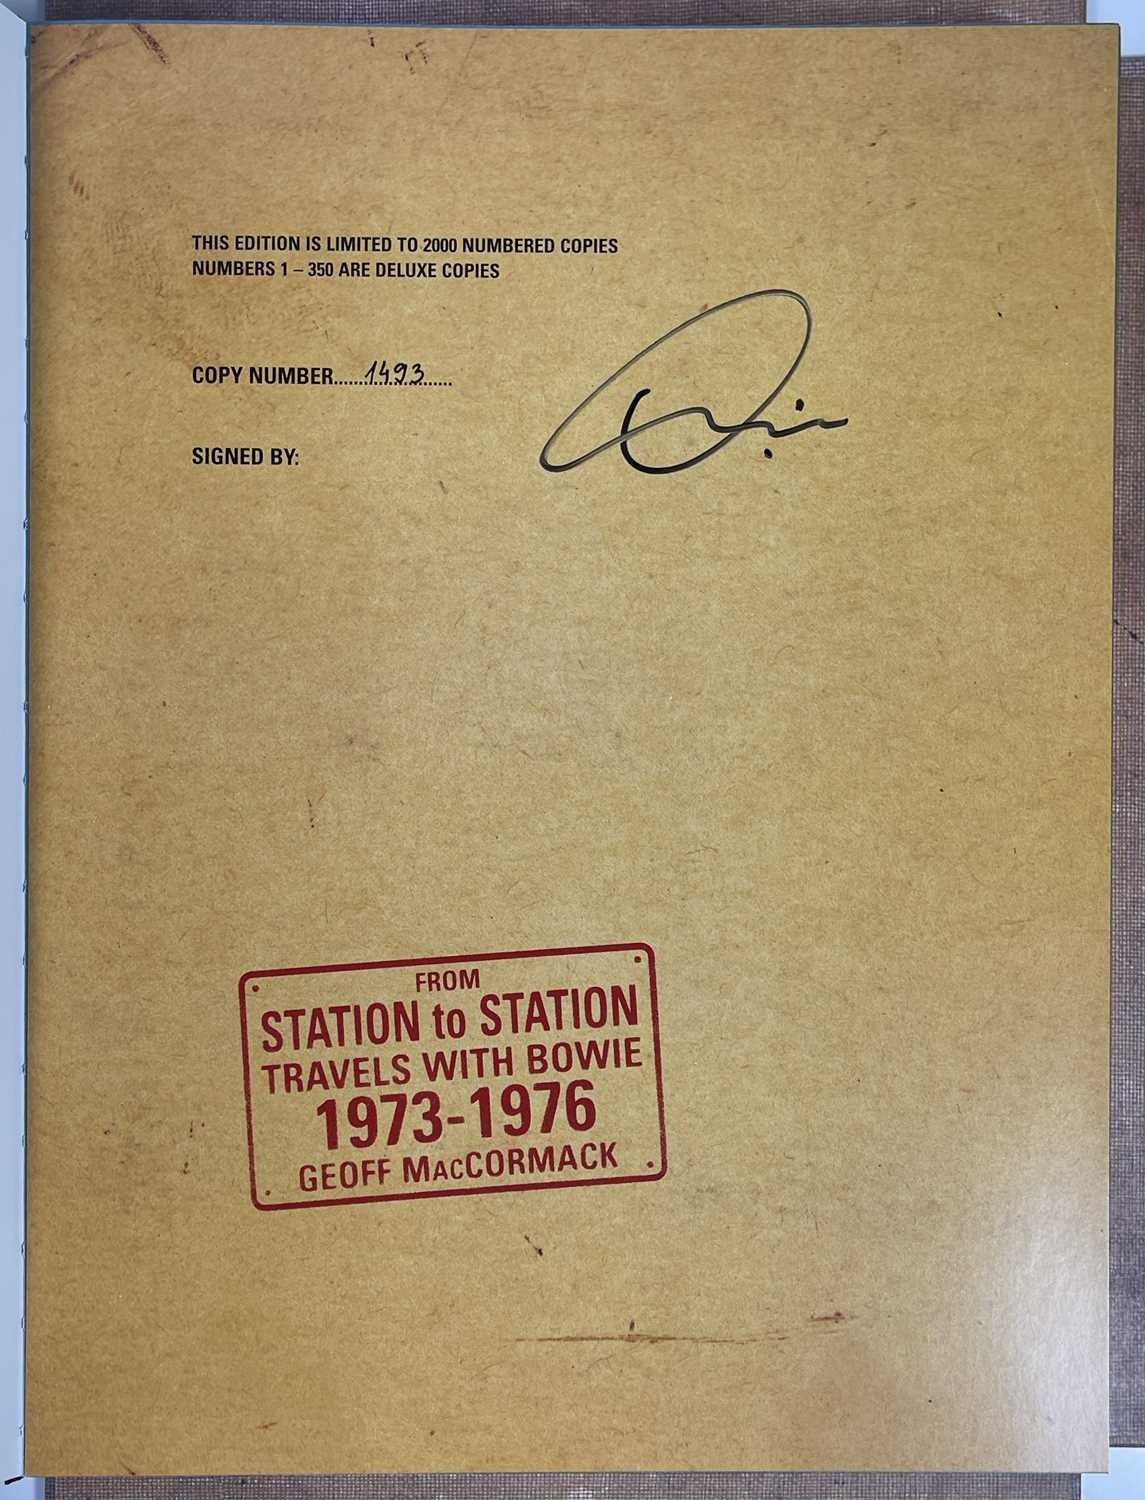 DAVID BOWIE - BOWIE SIGNED STATION TO STATION GENESIS PUBLICATIONS BOOK. - Image 5 of 5